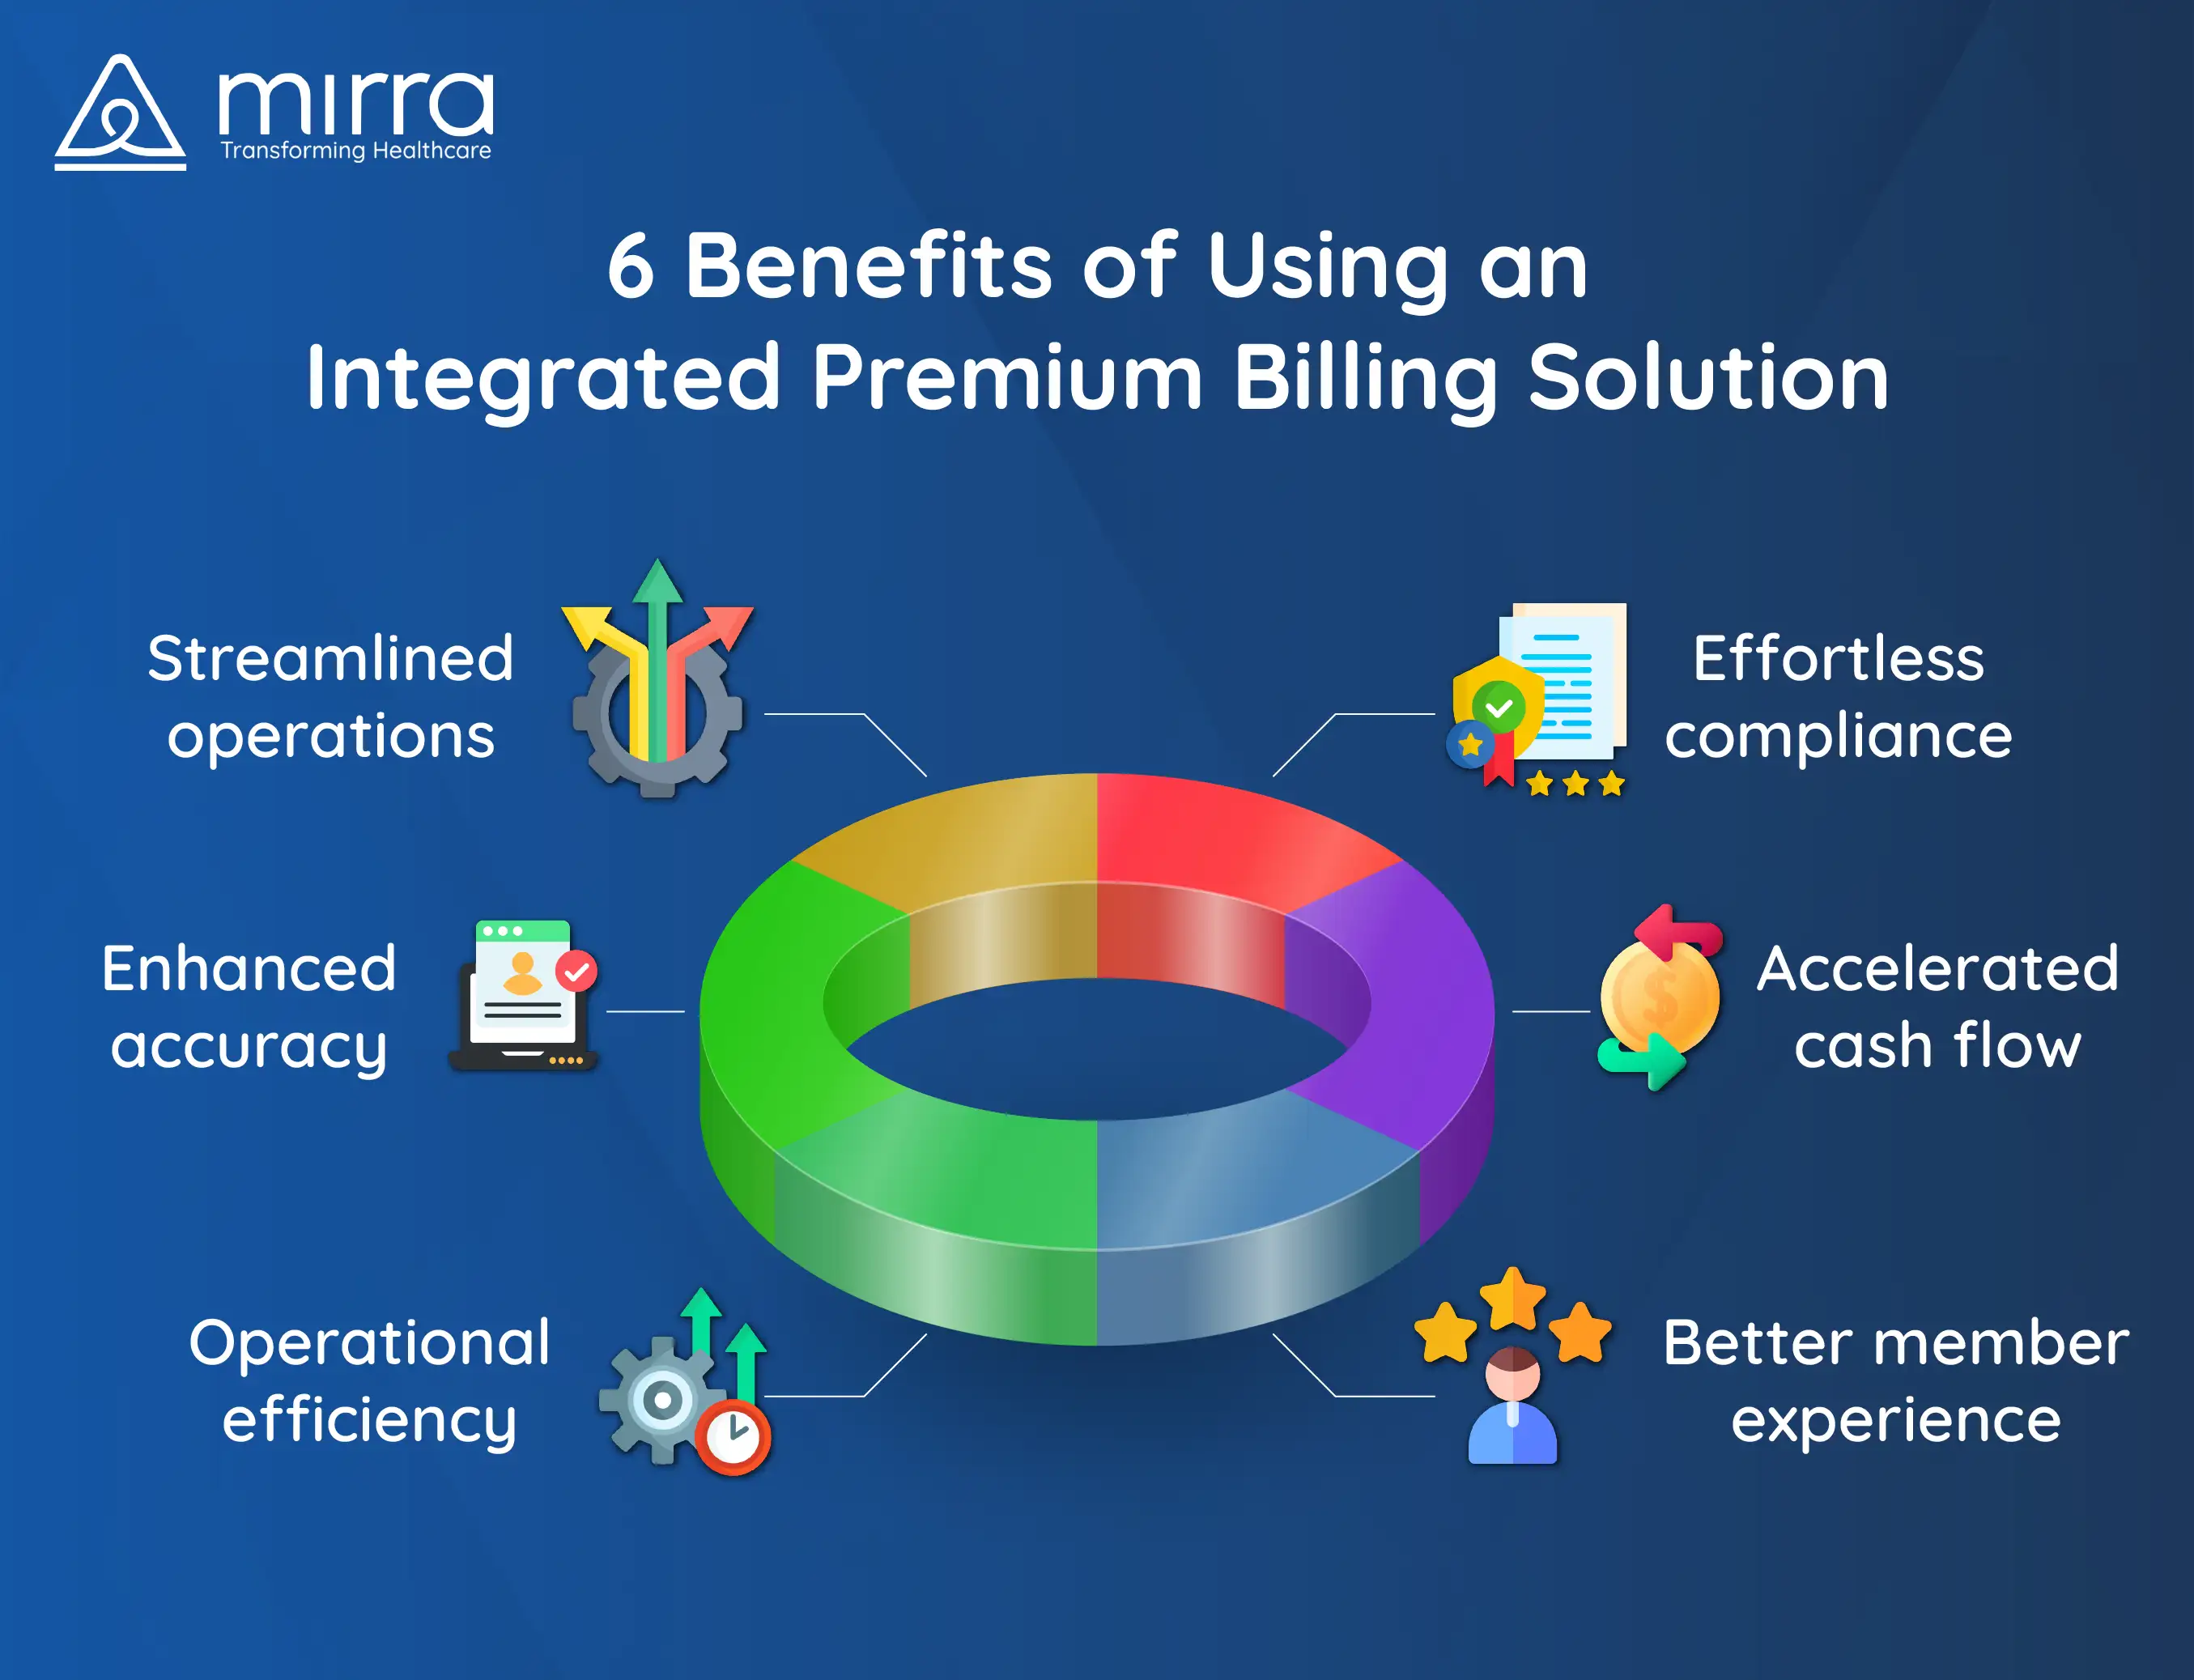 6 Benefits of Using an Integrated Premium Billing Solution